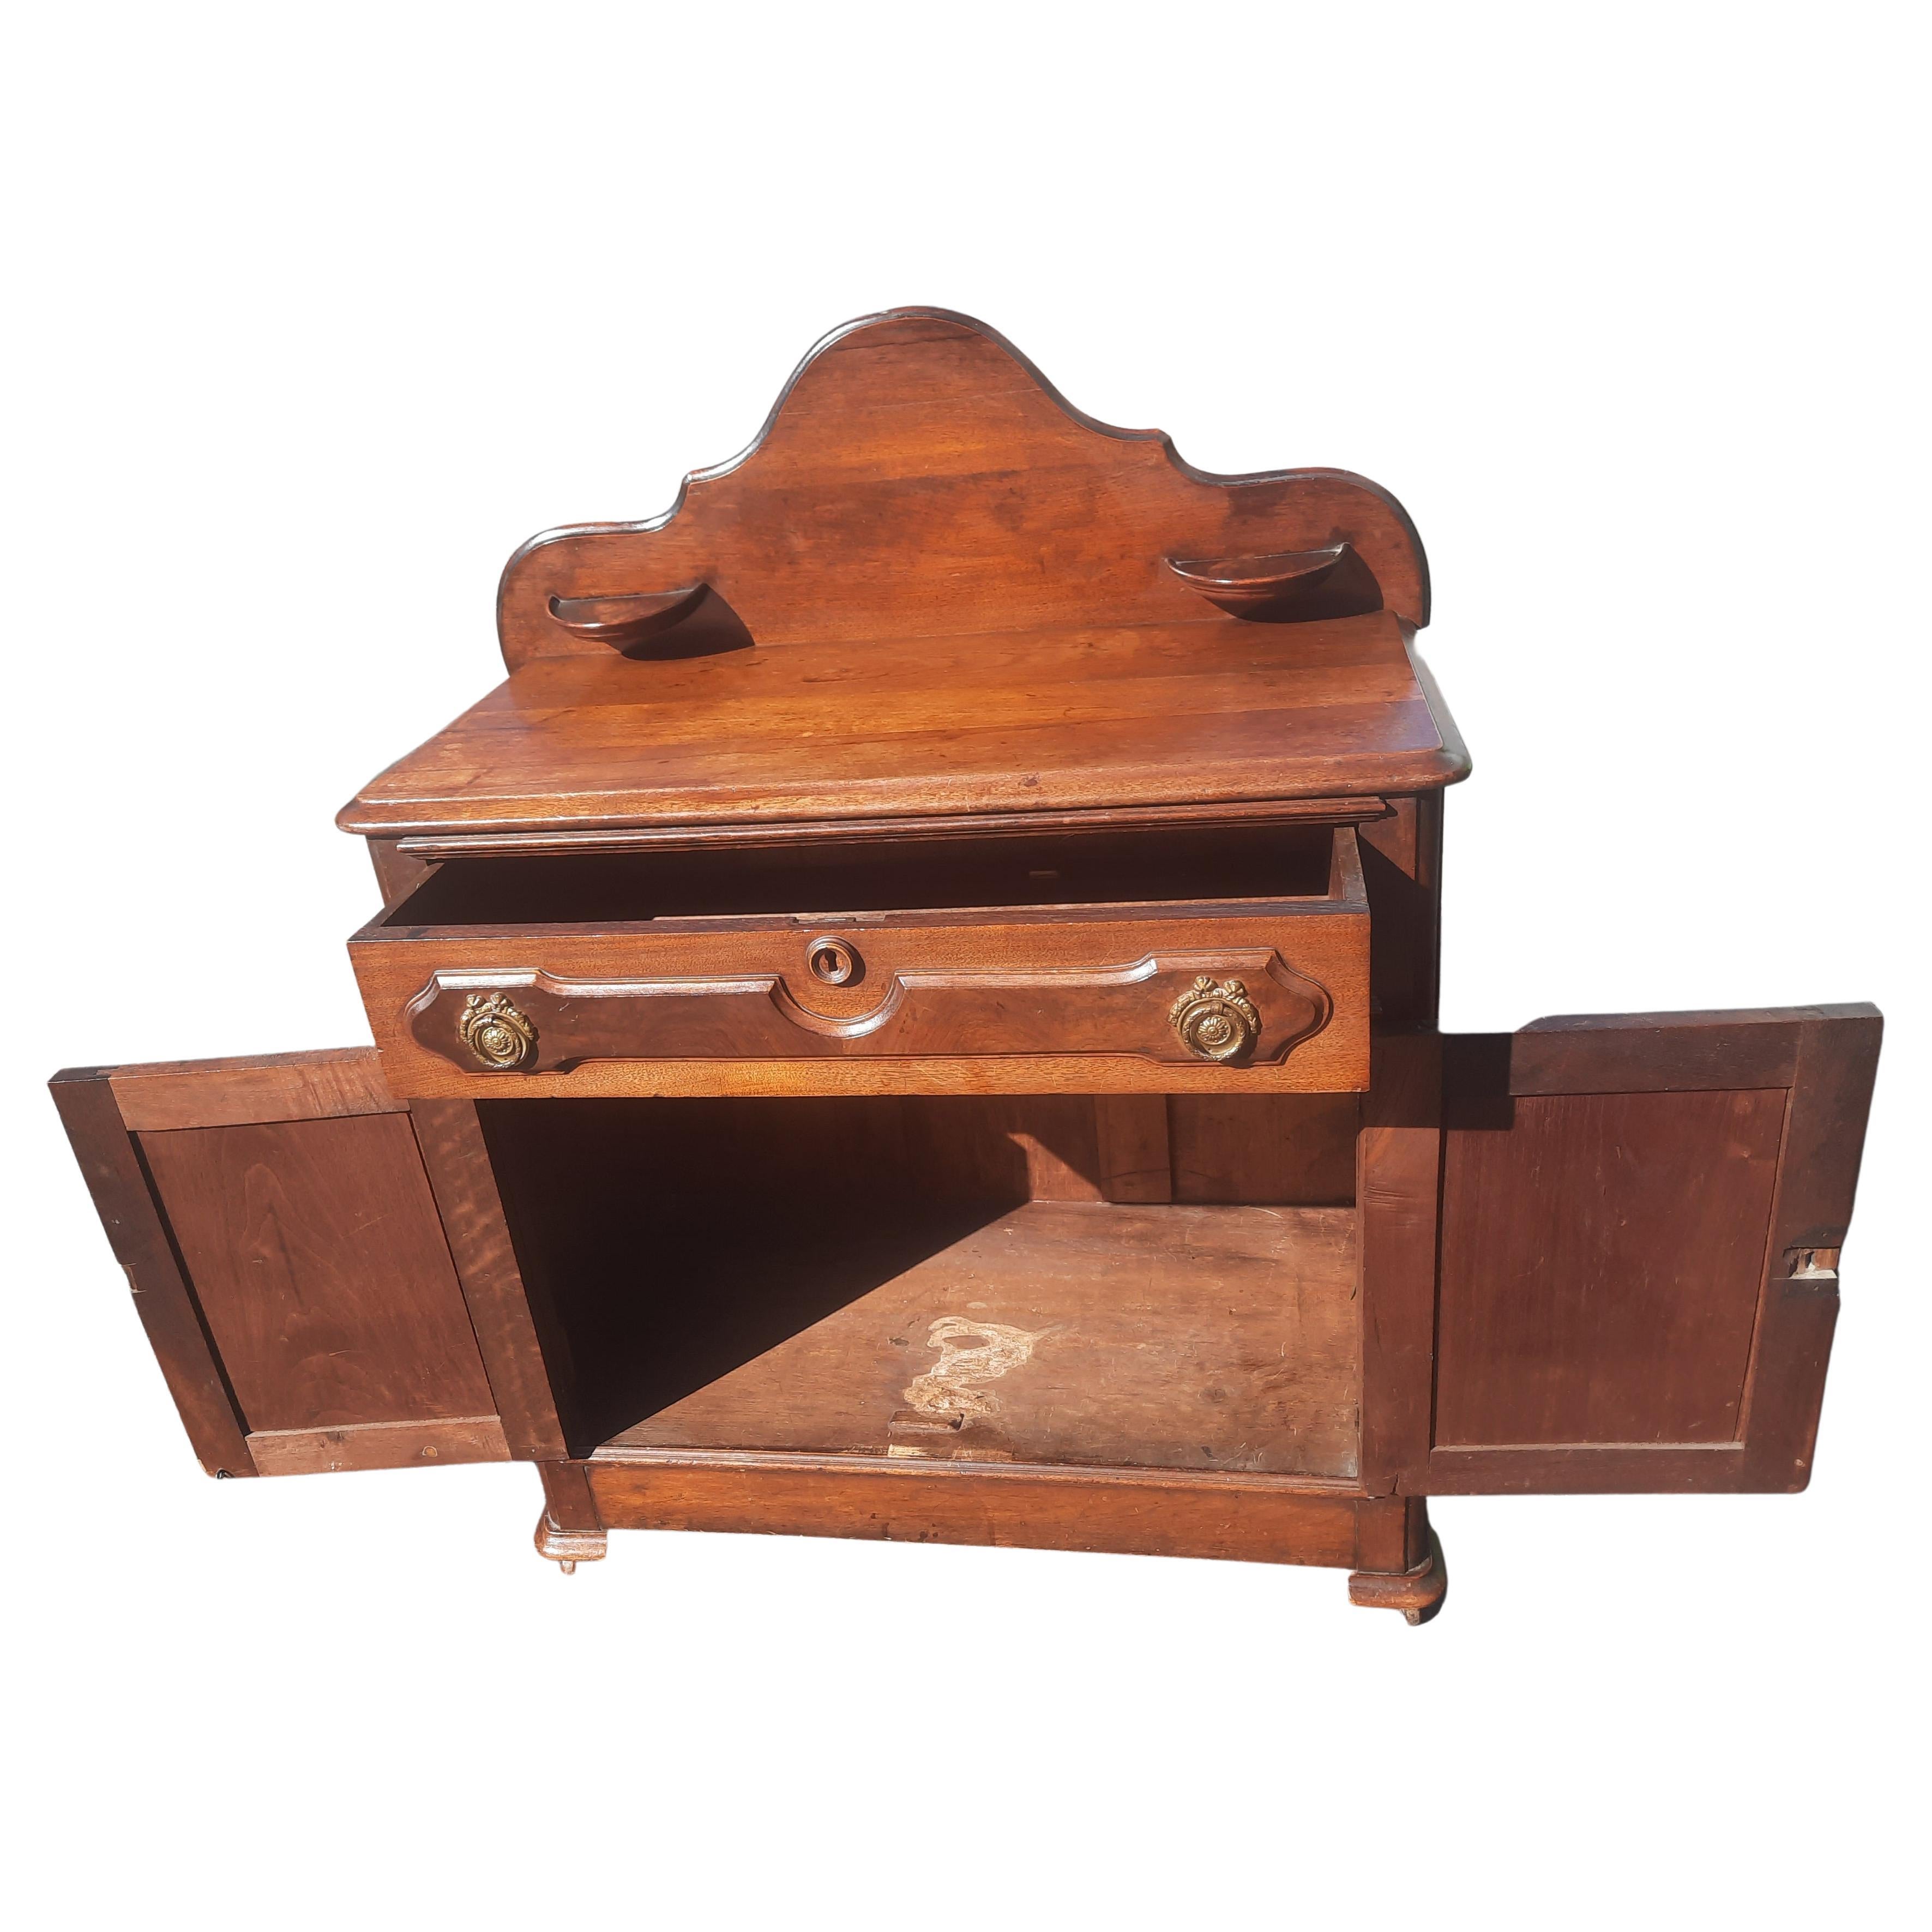 American Antique Walnut Washstand Candle Holder with Back Splash, Circa 1870s